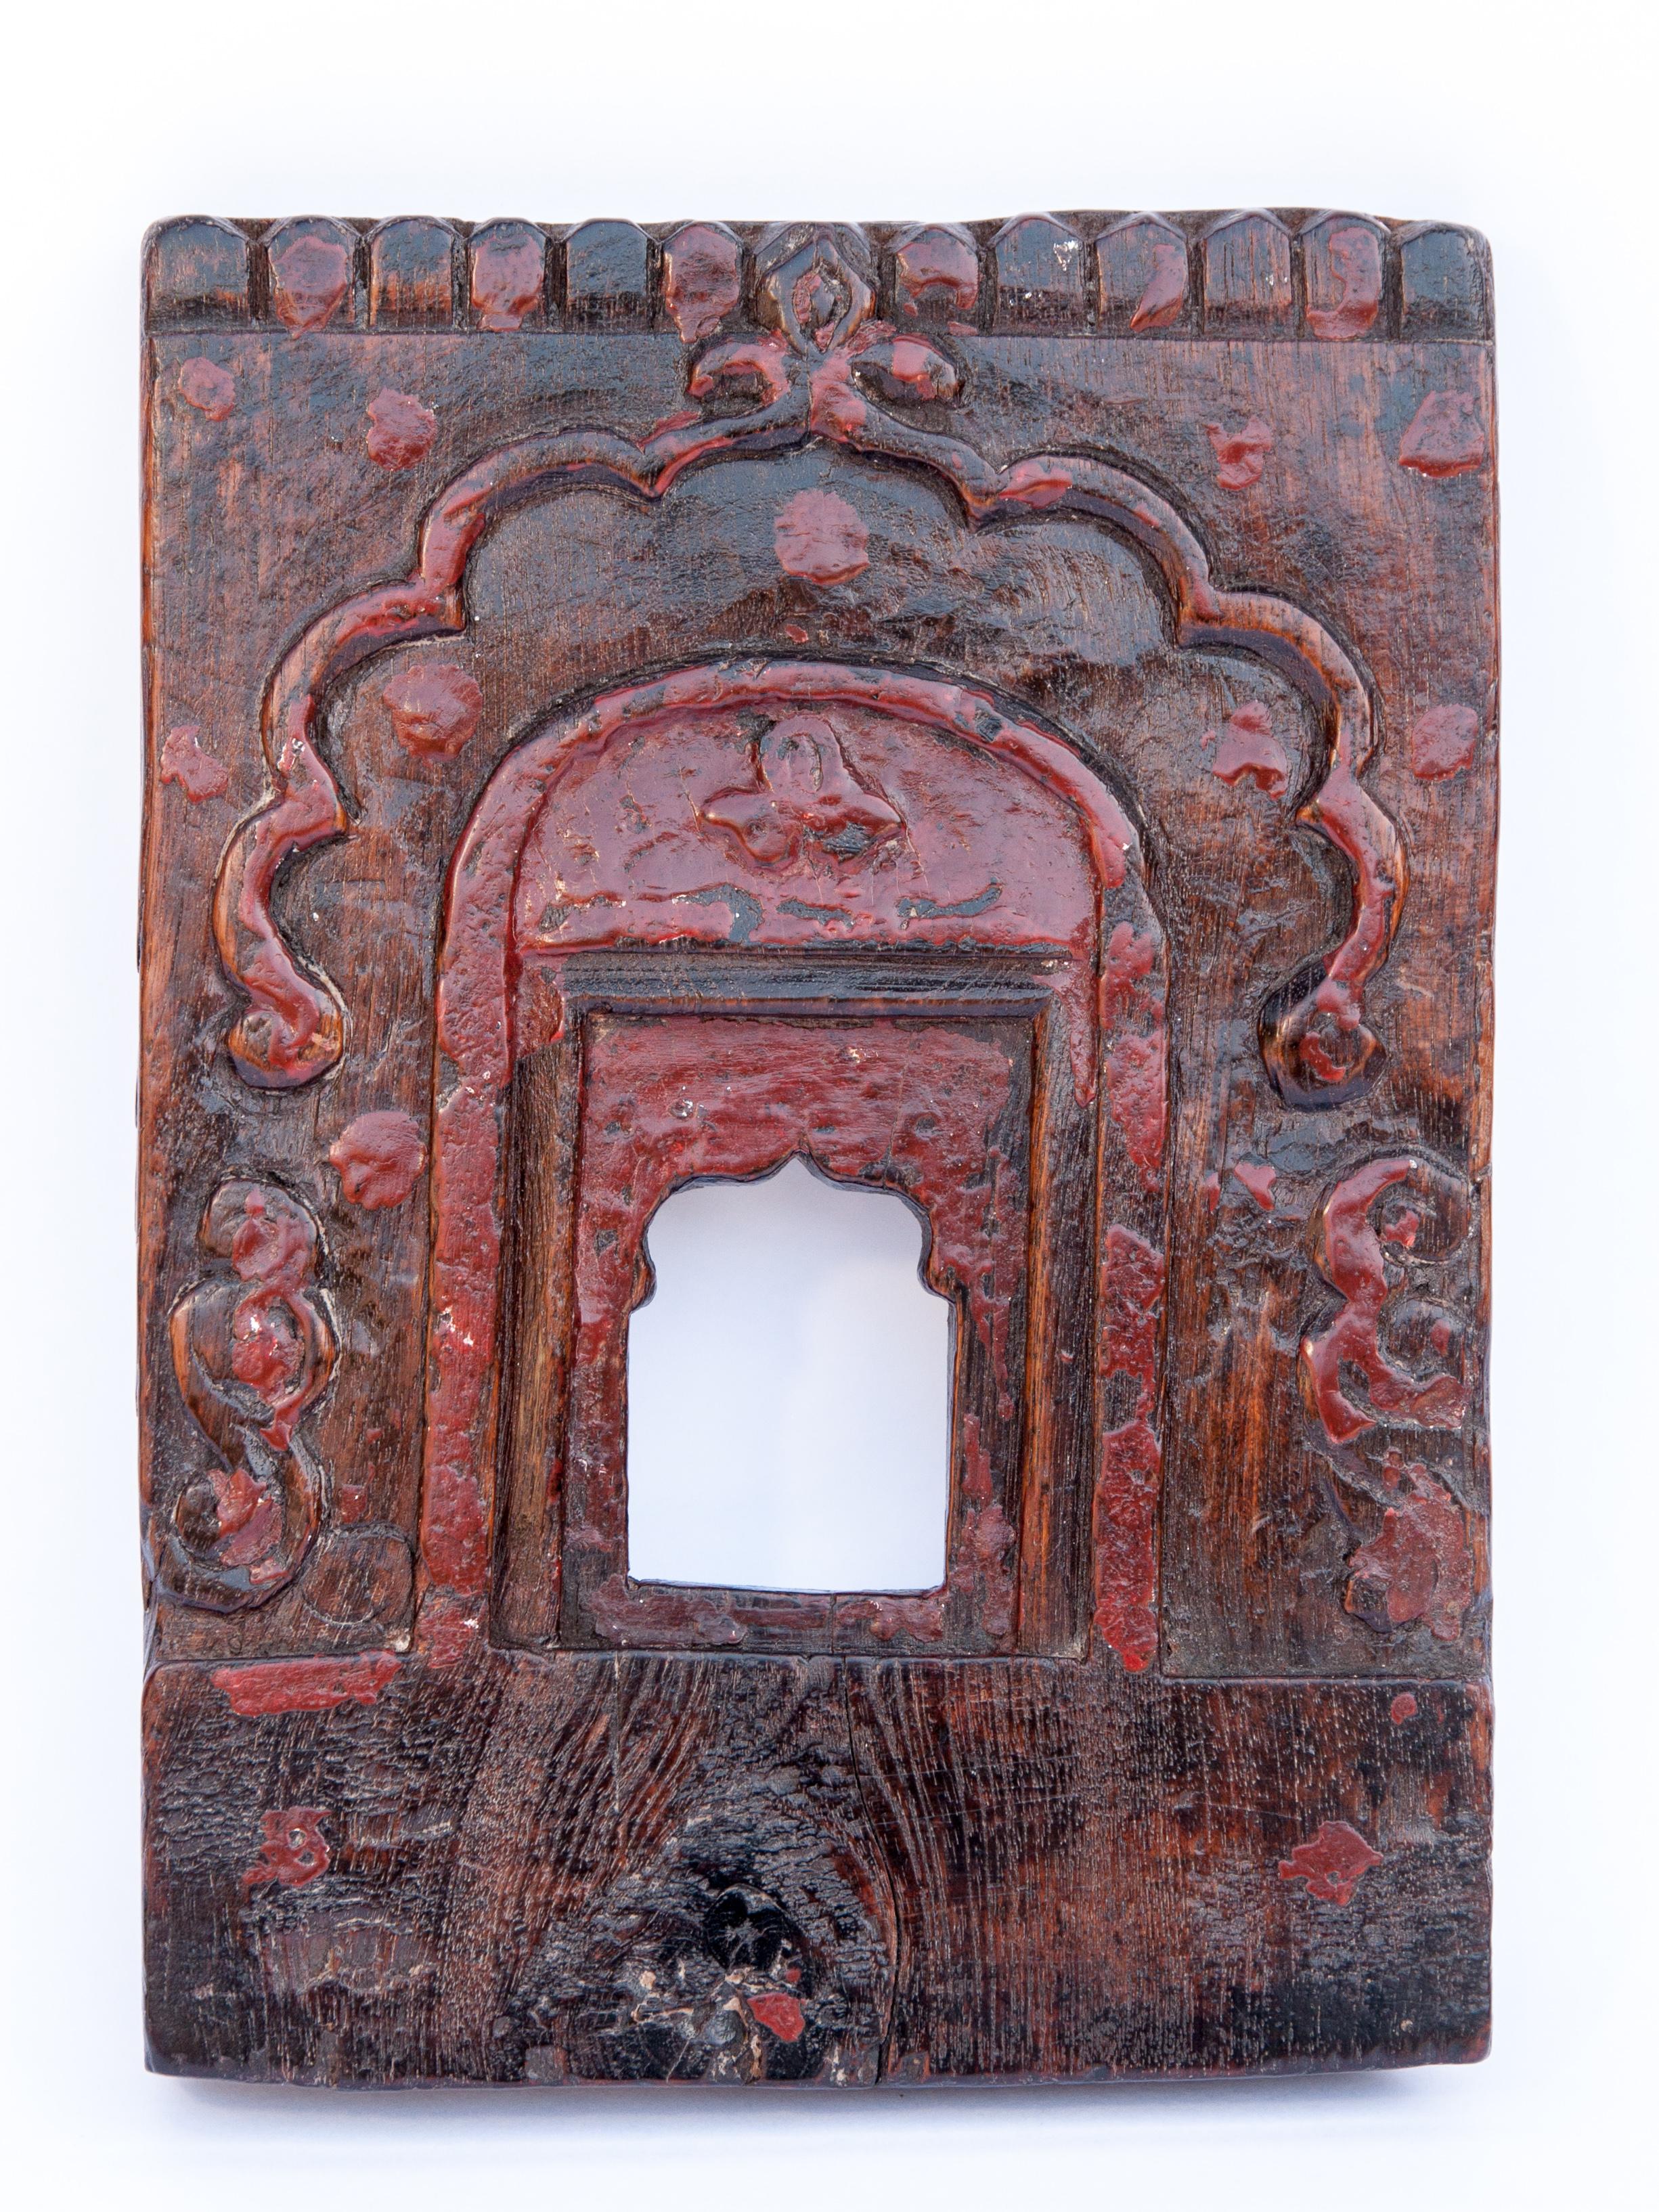 Hand-Carved Set of 3 Vintage Carved Wood Votive or Picture Frames, Mid-20th Century, India.